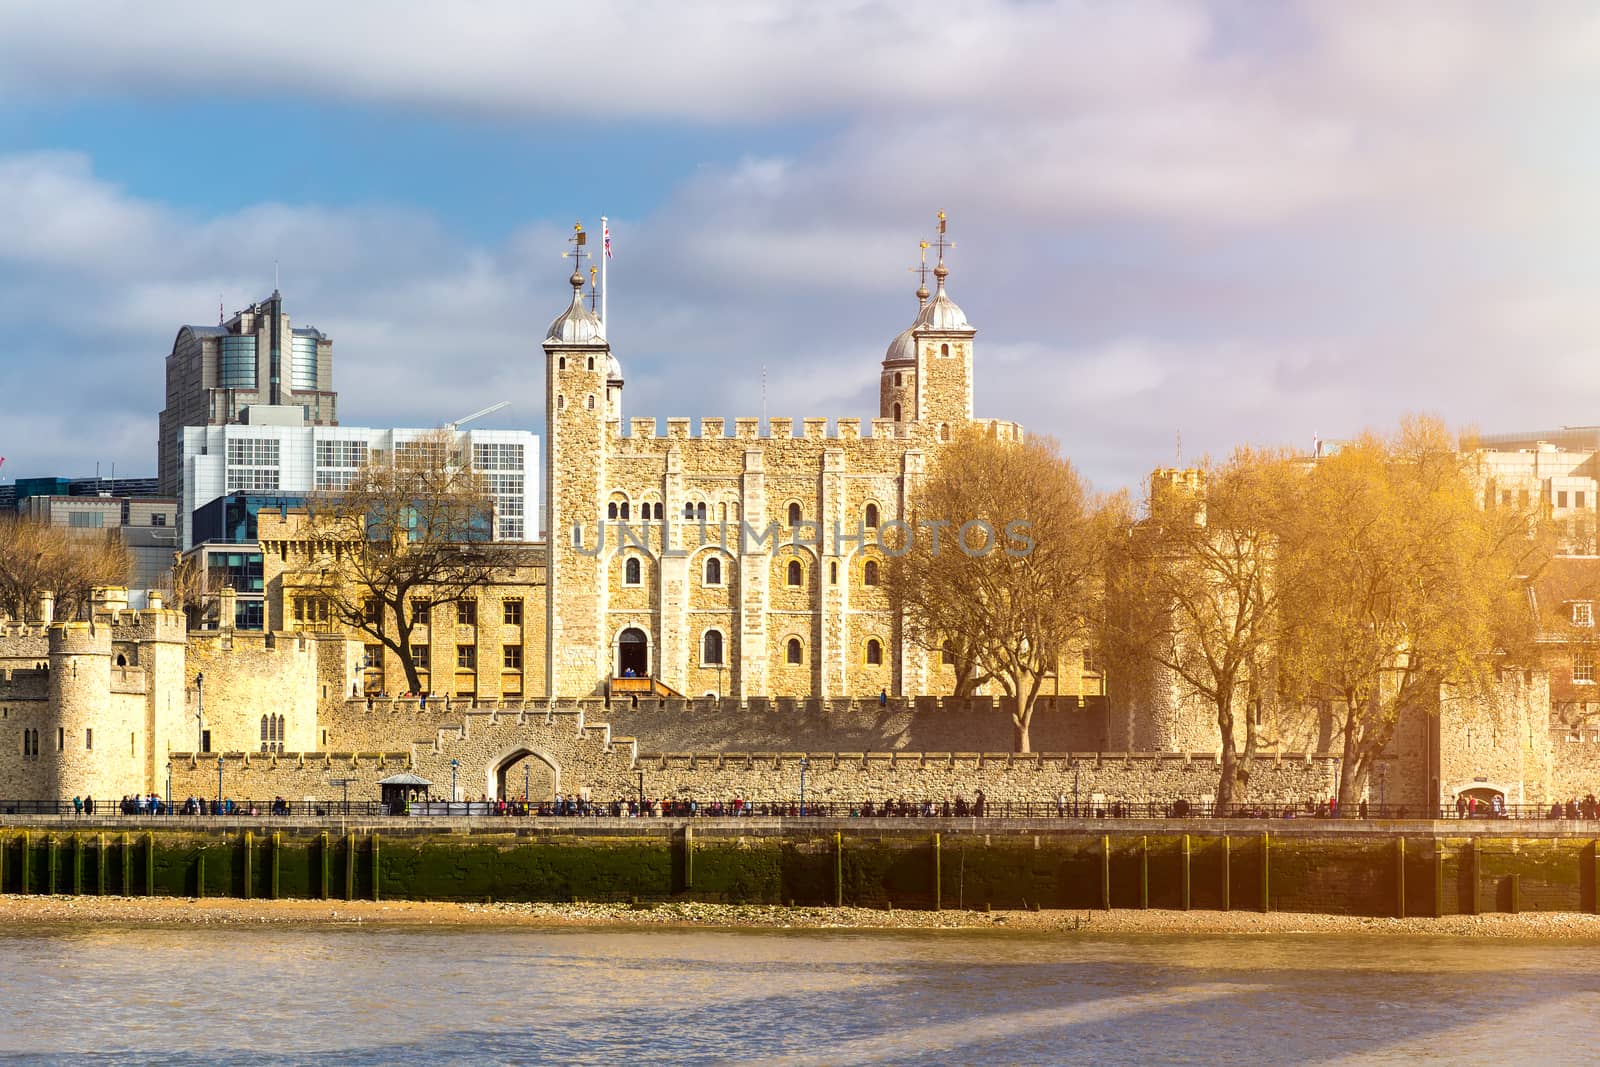 Tower of London located on the north bank of the River Thames in by DaLiu